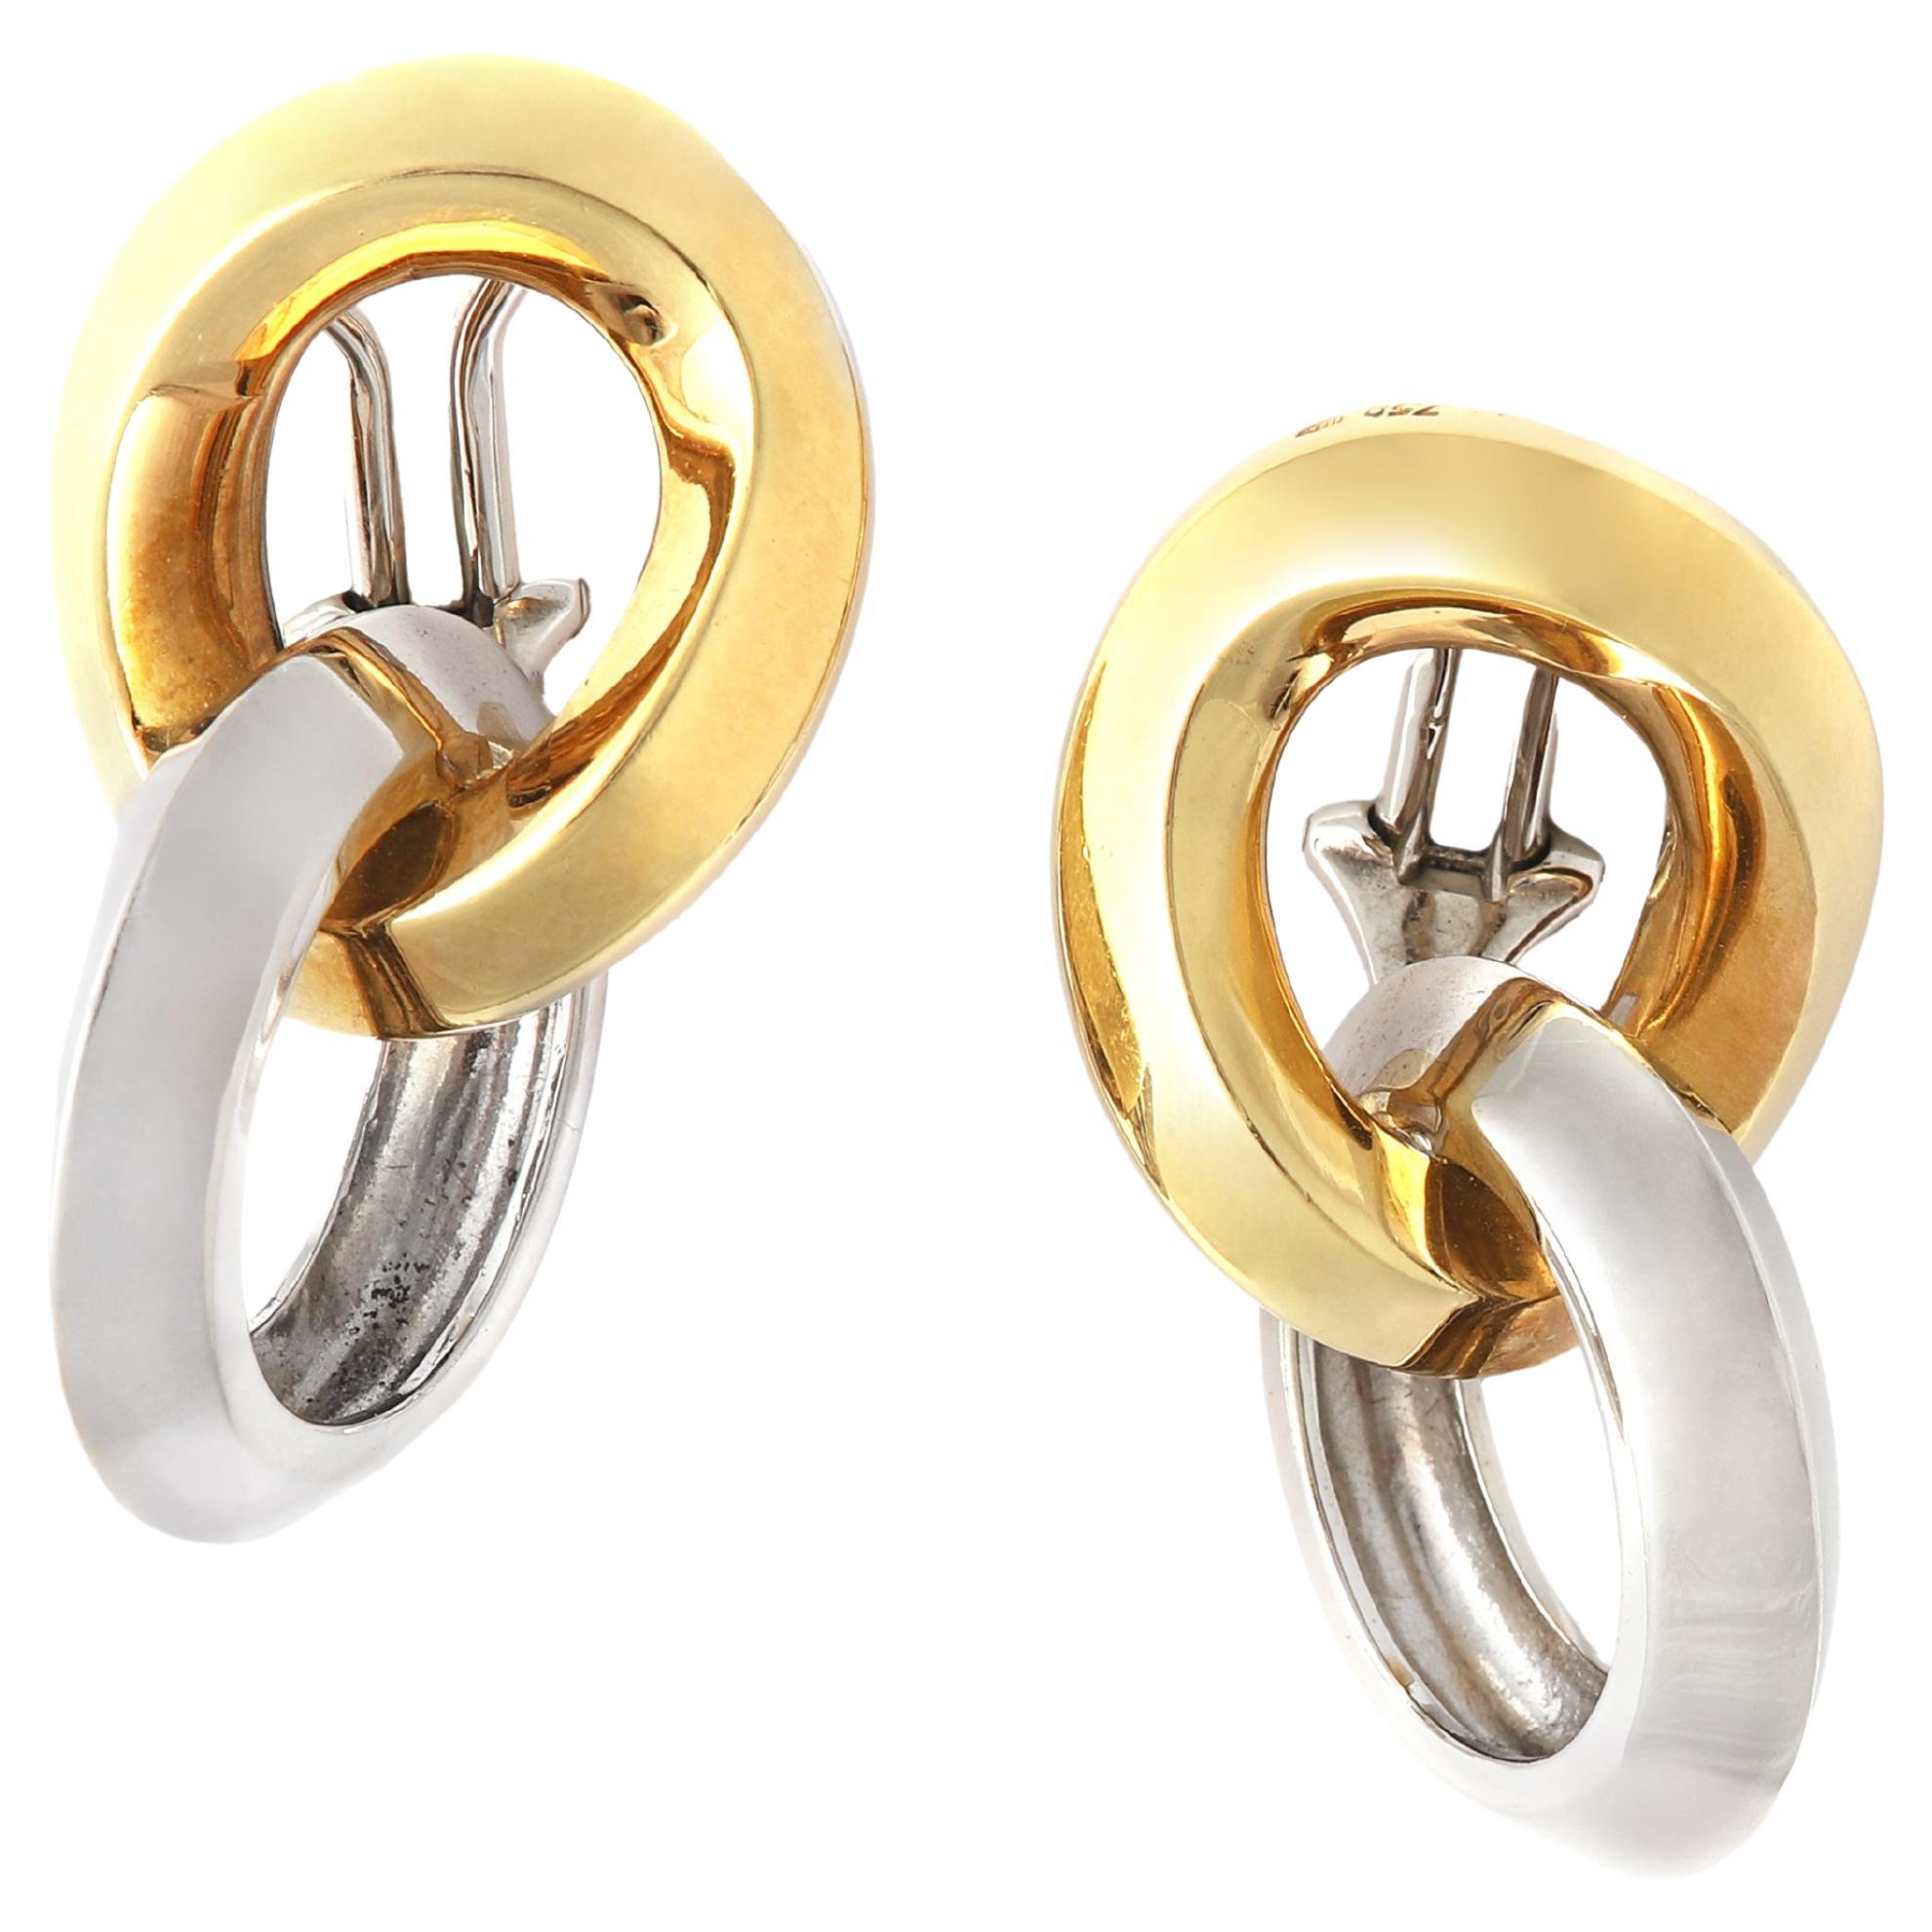 Pomellato White and Yellow Gold 18K Earrings.

Embrace the artistry of Pomellato with these 18K White and Yellow Gold Earrings. The harmonious blend of white and yellow gold creates a captivating contrast, showcasing Pomellato's signature style.